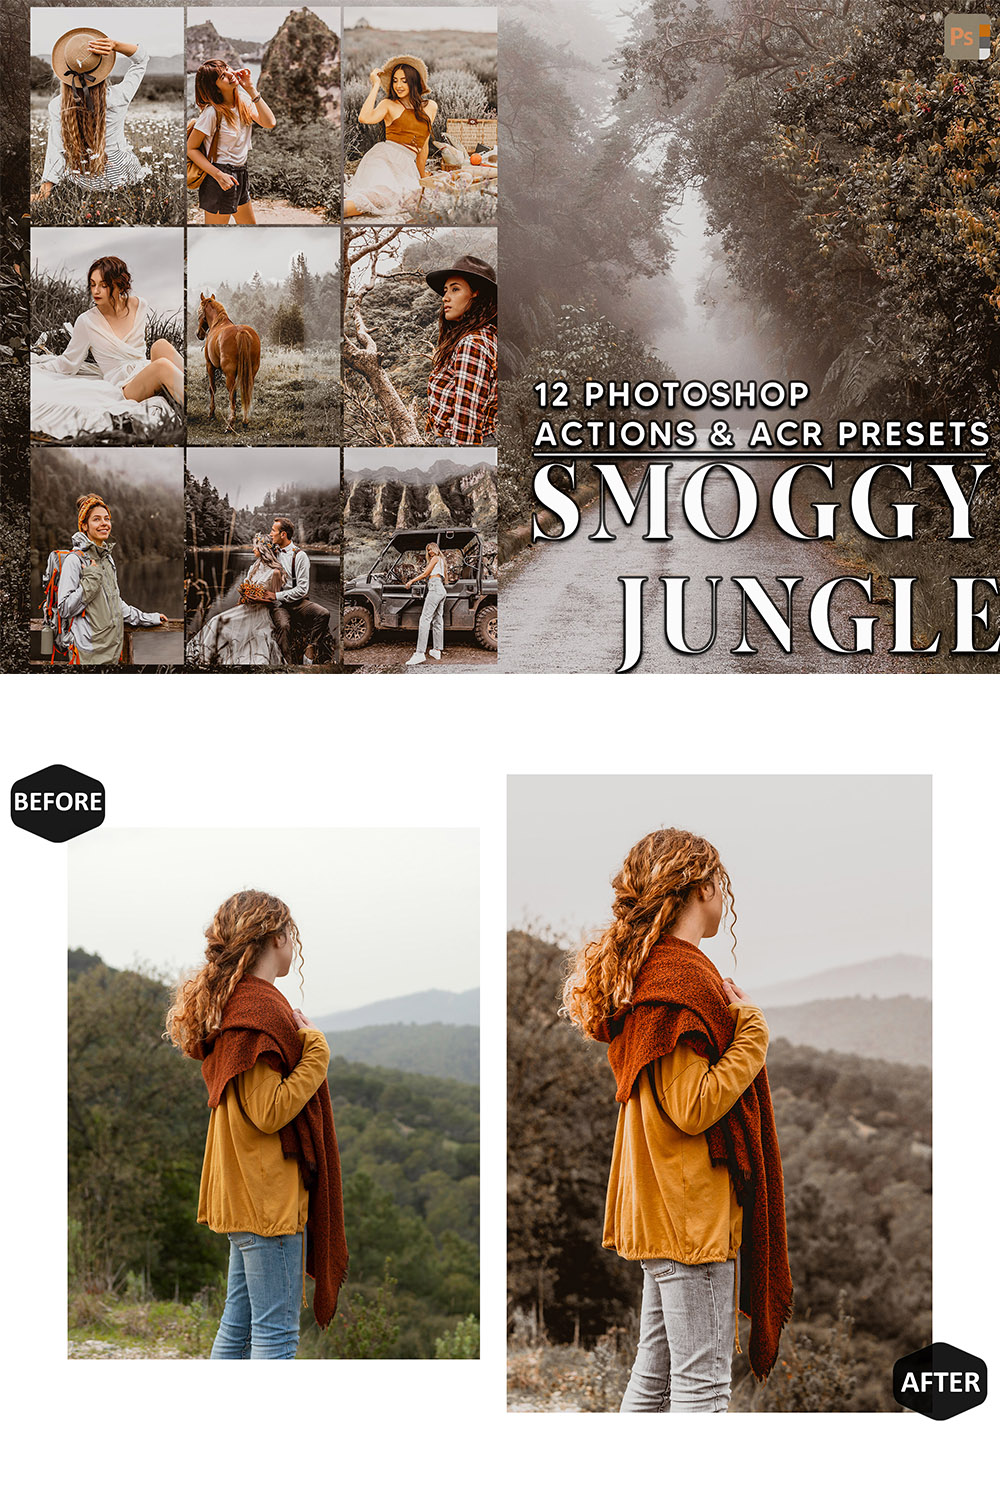 12 Photoshop Actions, Smoggy Jungle Ps Action, Foggy ACR Preset, Forest Moody Ps Filter, Atn Portrait And Lifestyle Theme For Instagram, Blogger pinterest preview image.